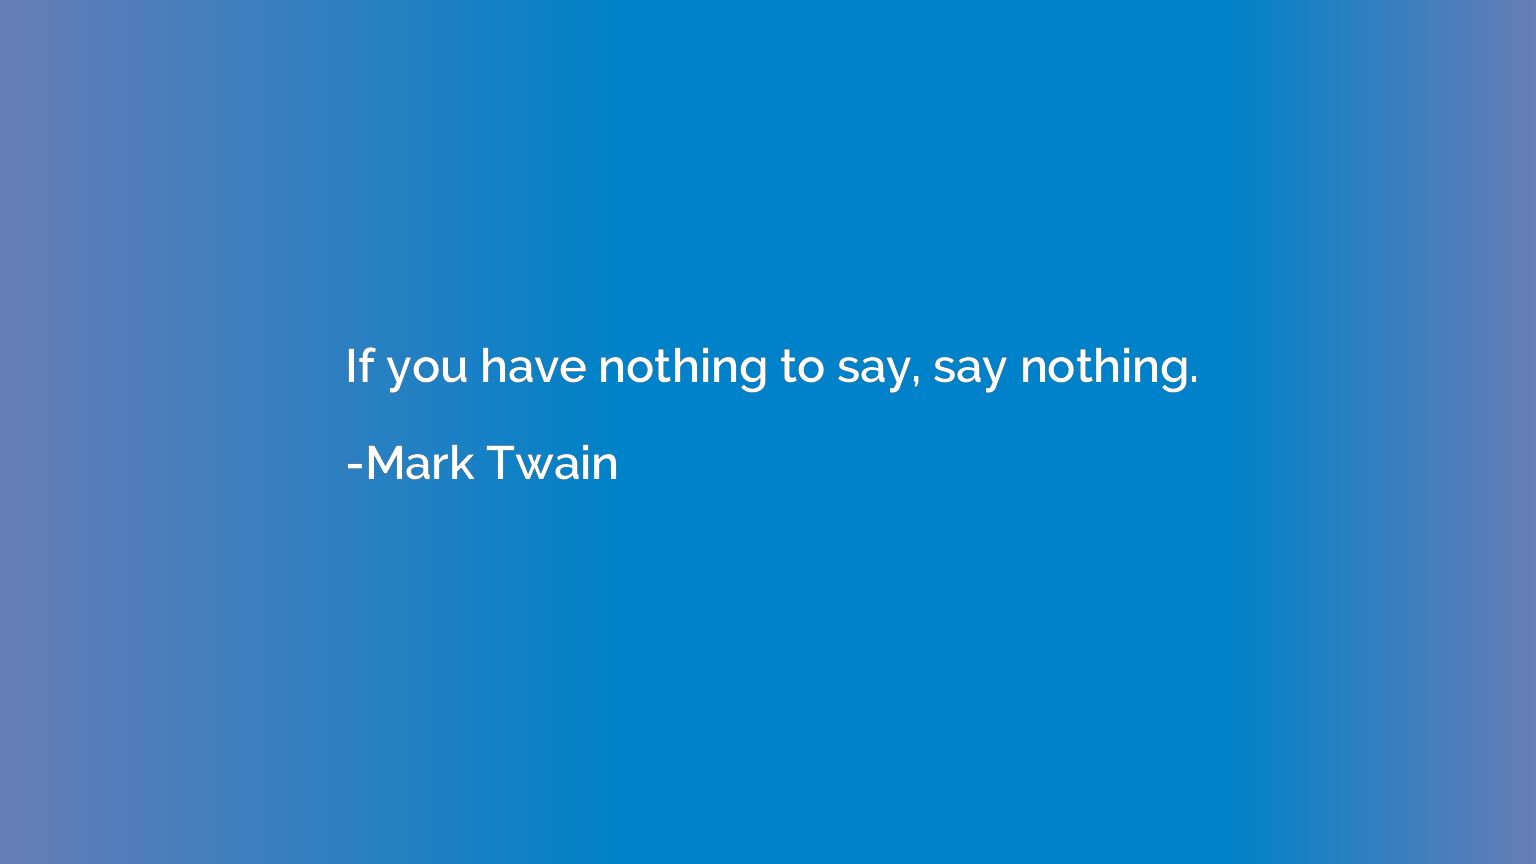 If you have nothing to say, say nothing.